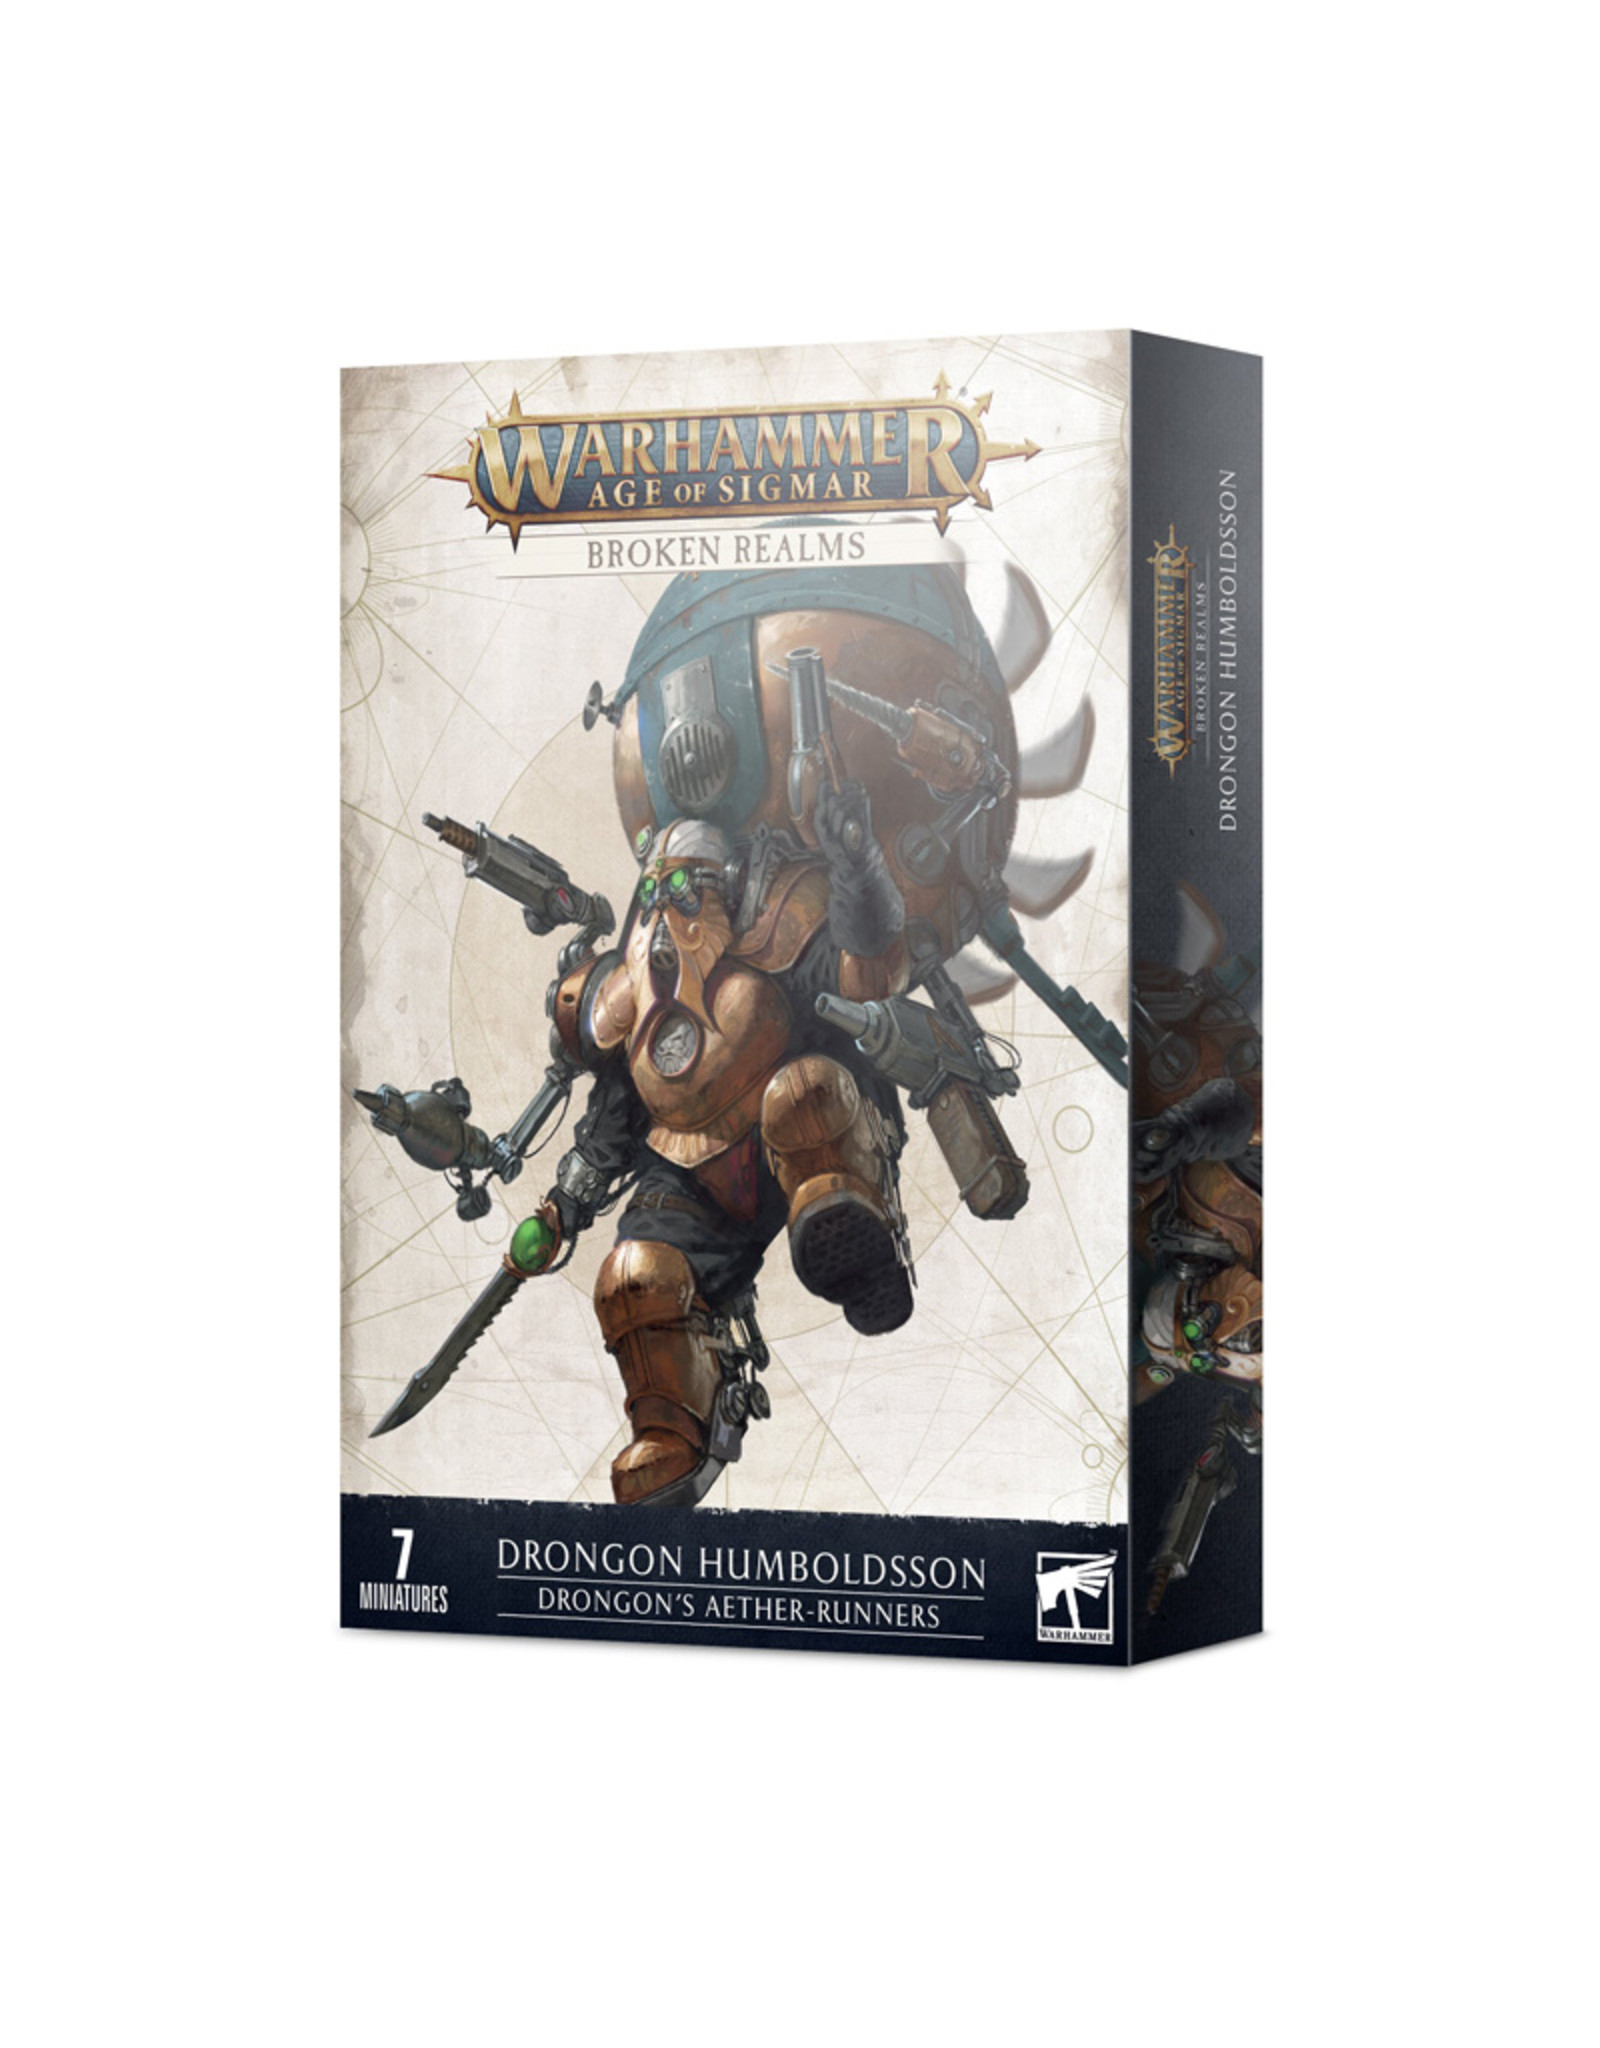 Games Workshop Warhammer Age of Sigmar Broken Realms Drongon Humboldsson Drongon's Aether-Runners